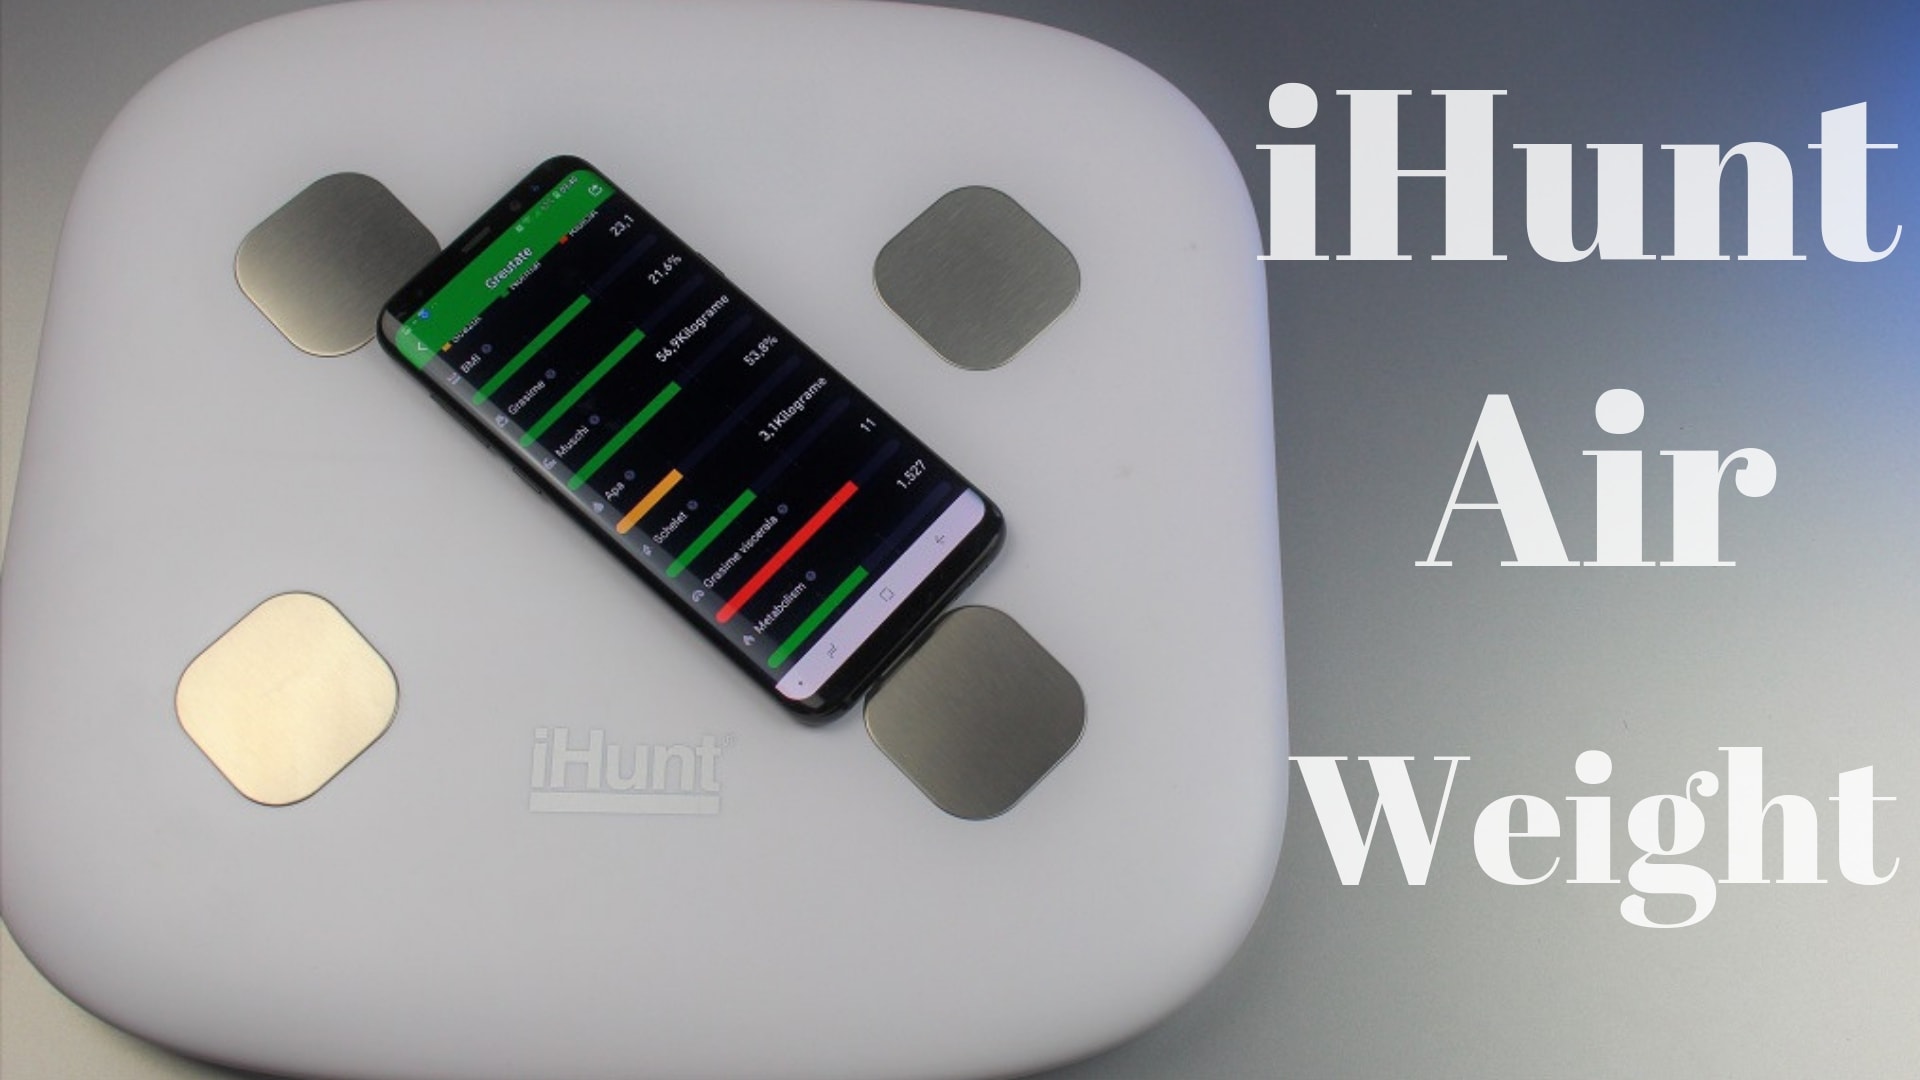 Review iHunt Air Weight, cantar inteligent cu WiFi